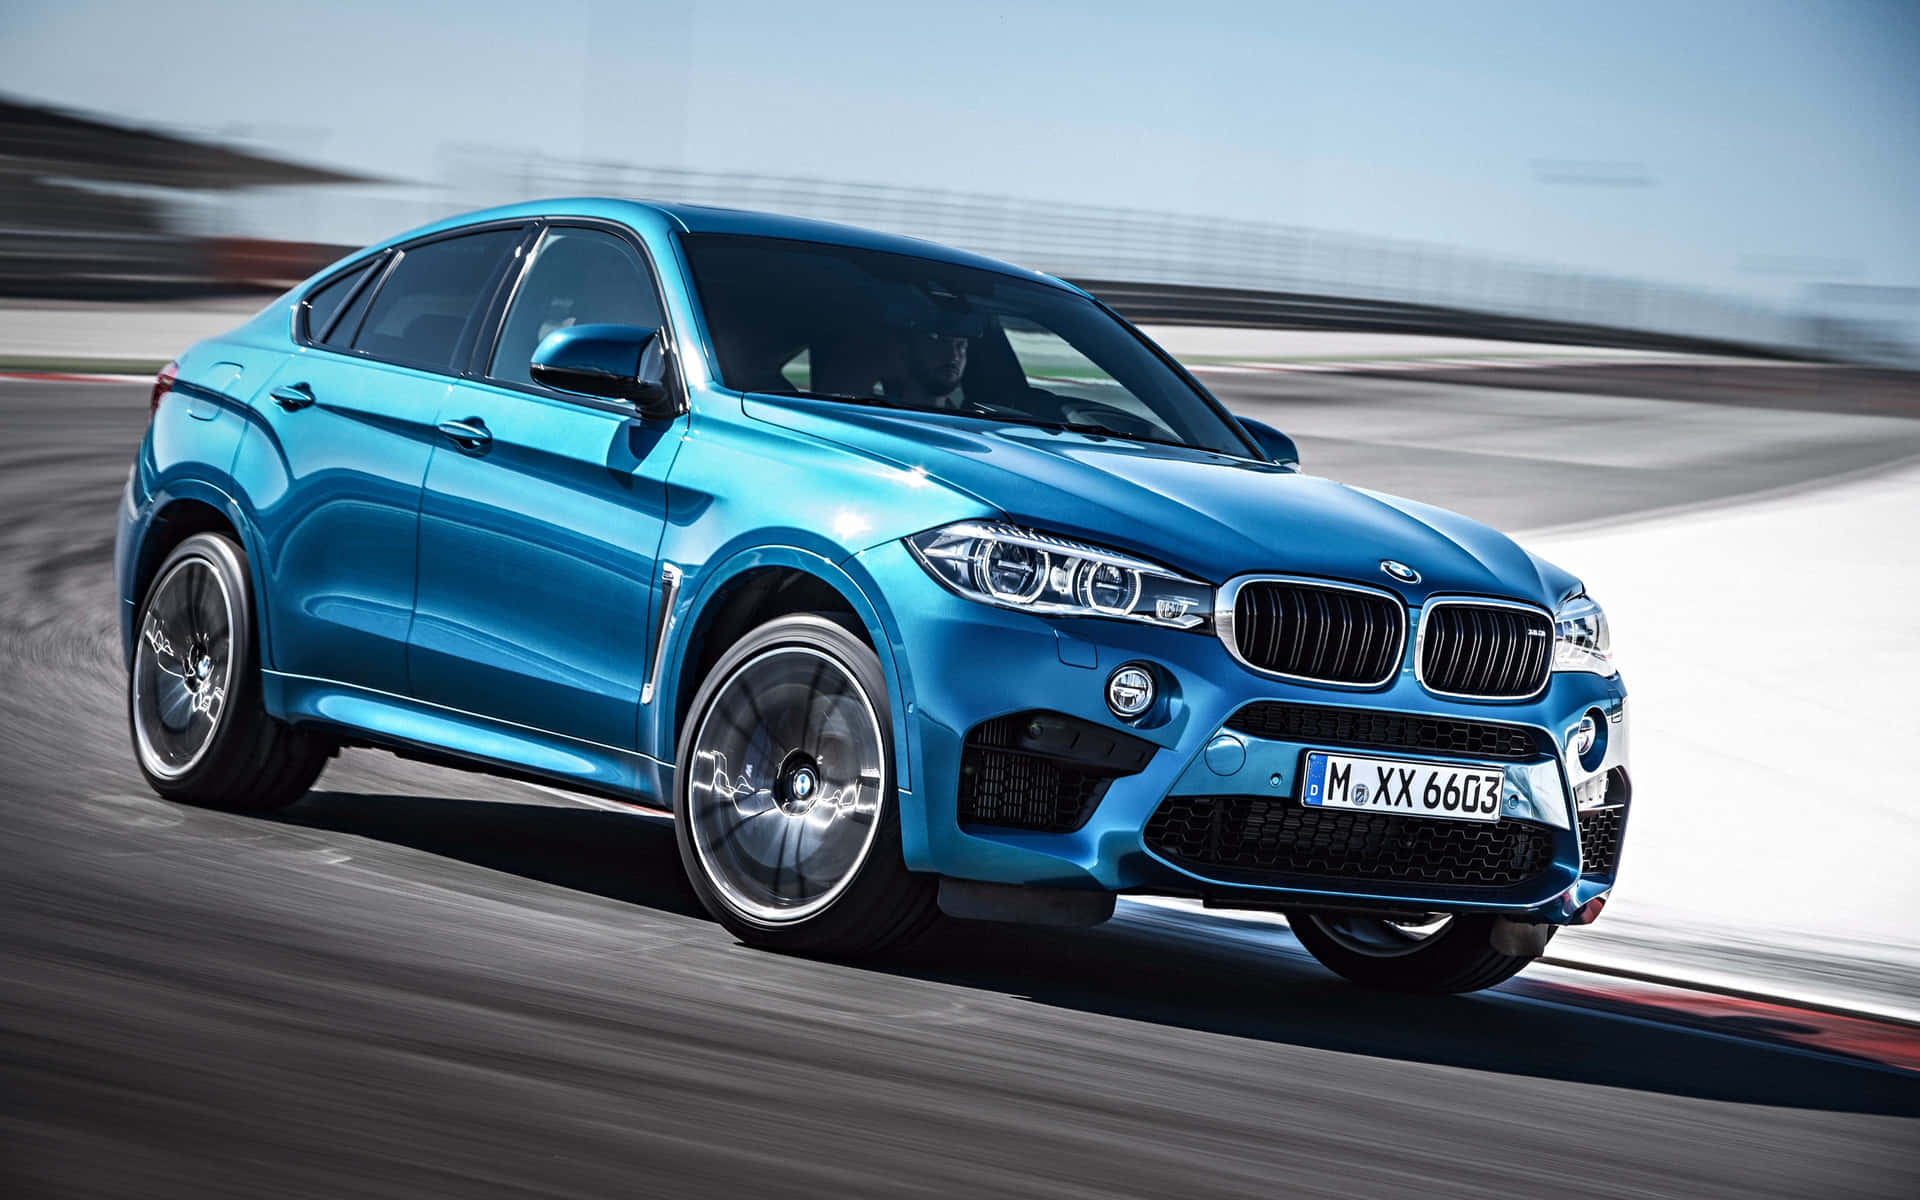 The Blue Bmw X6 Is Driving On A Track